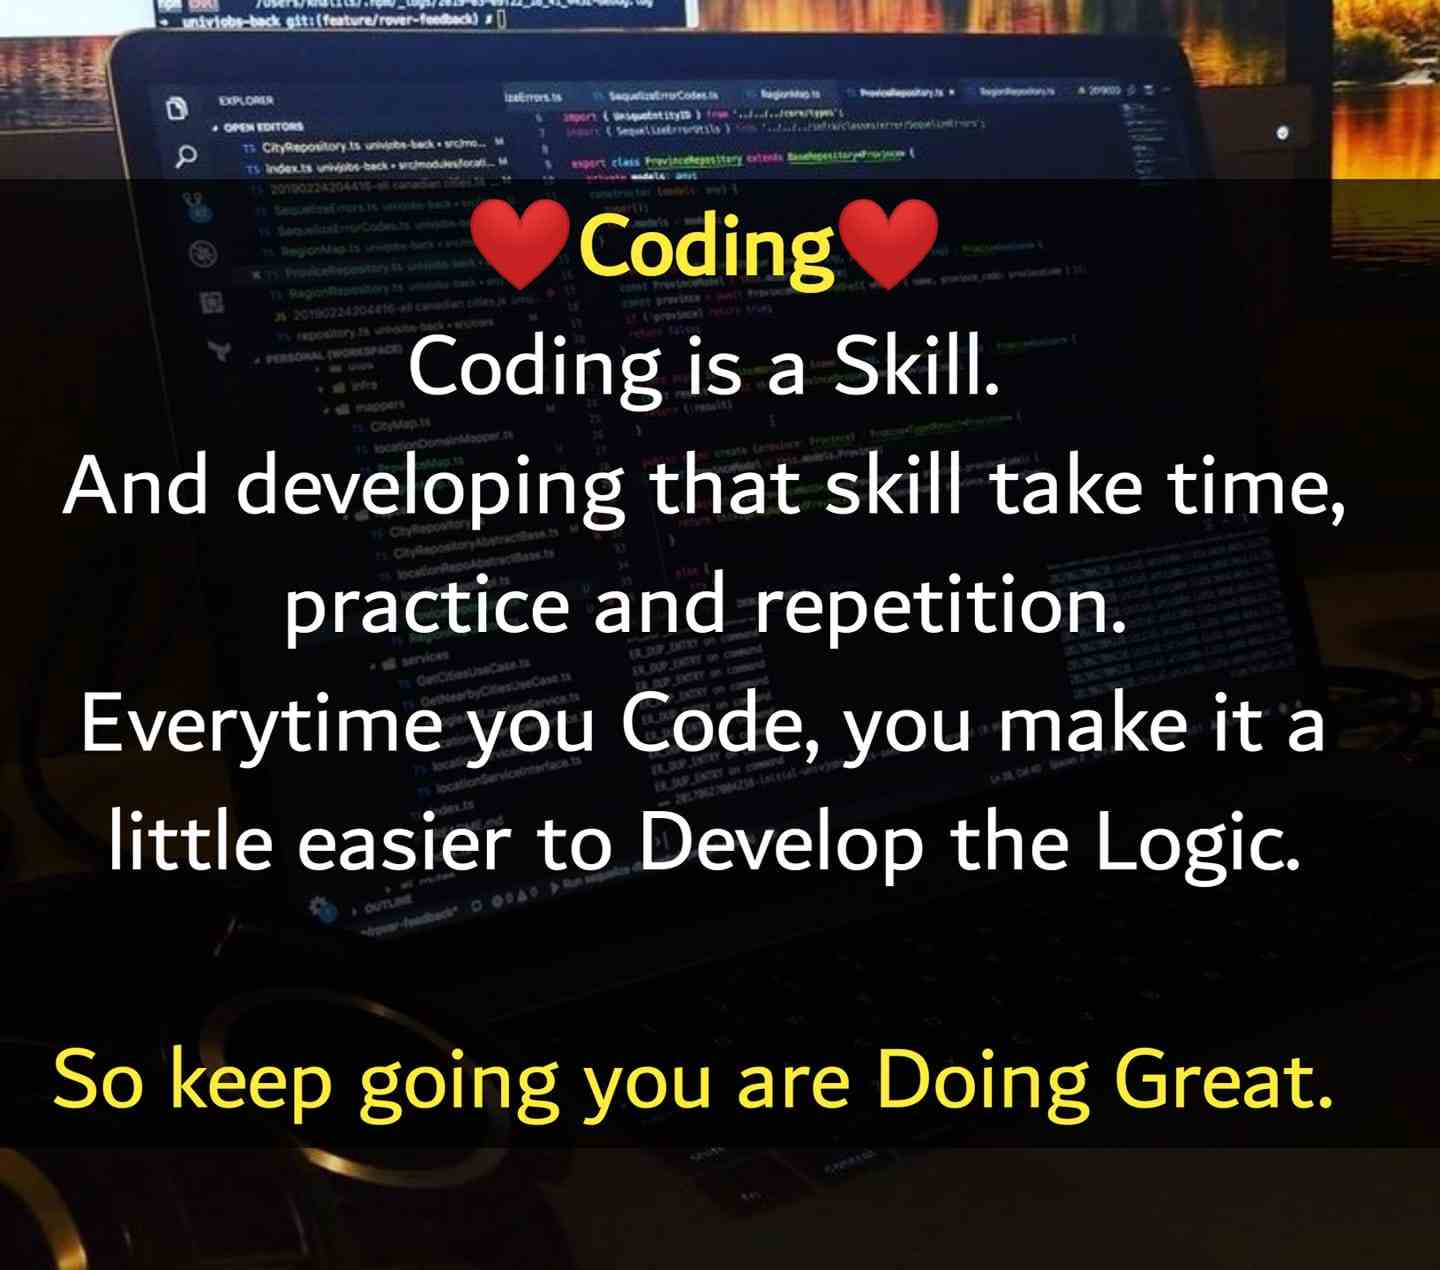 Coding is a Skill